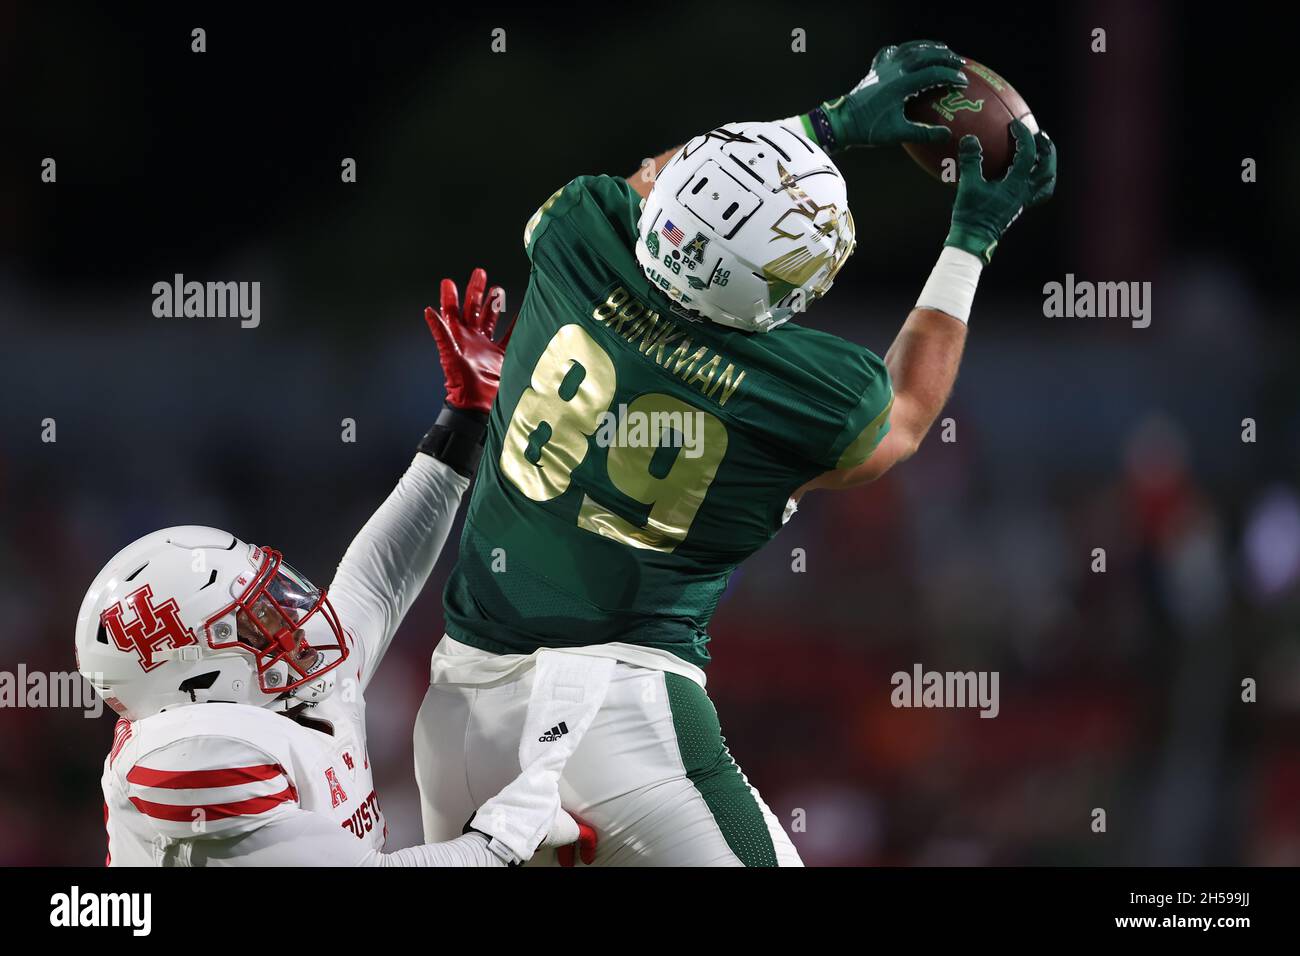 Tampa, FL, USA. 6th Nov, 2021. South Florida Bulls tight end Mitchell Brinkman (89) catches a touchdown pass over a defender during the game between the Houston Cougars and the South Florida Bulls at Raymond James Stadium in Tampa, FL. (Photo by Peter Joneleit). Credit: csm/Alamy Live News Stock Photo